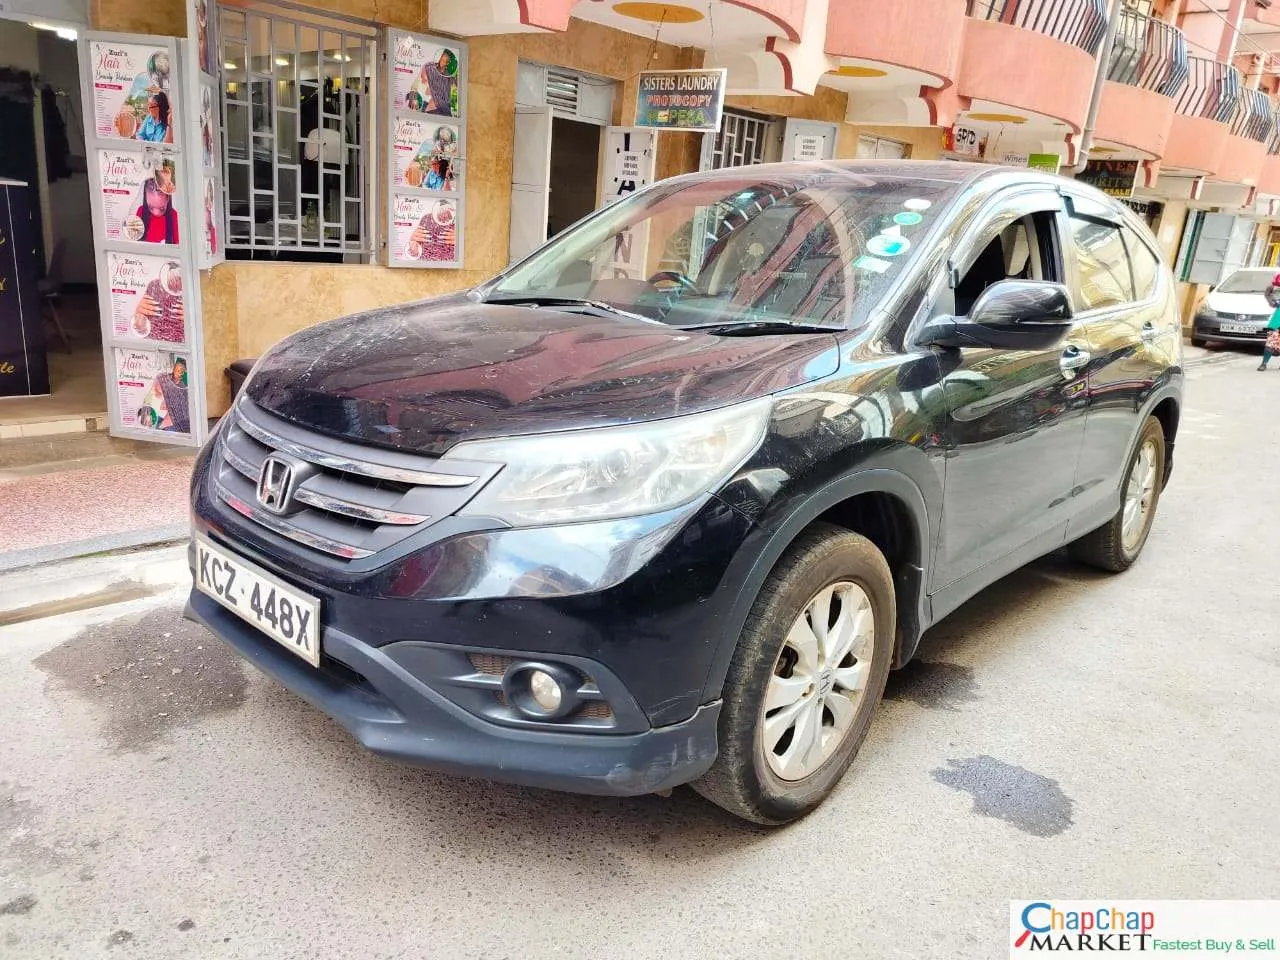 Cars Cars For Sale-Honda CR-V for sale in kenya You Pay 30% Deposit Trade in OK crv hire purchase installments as NEW 9